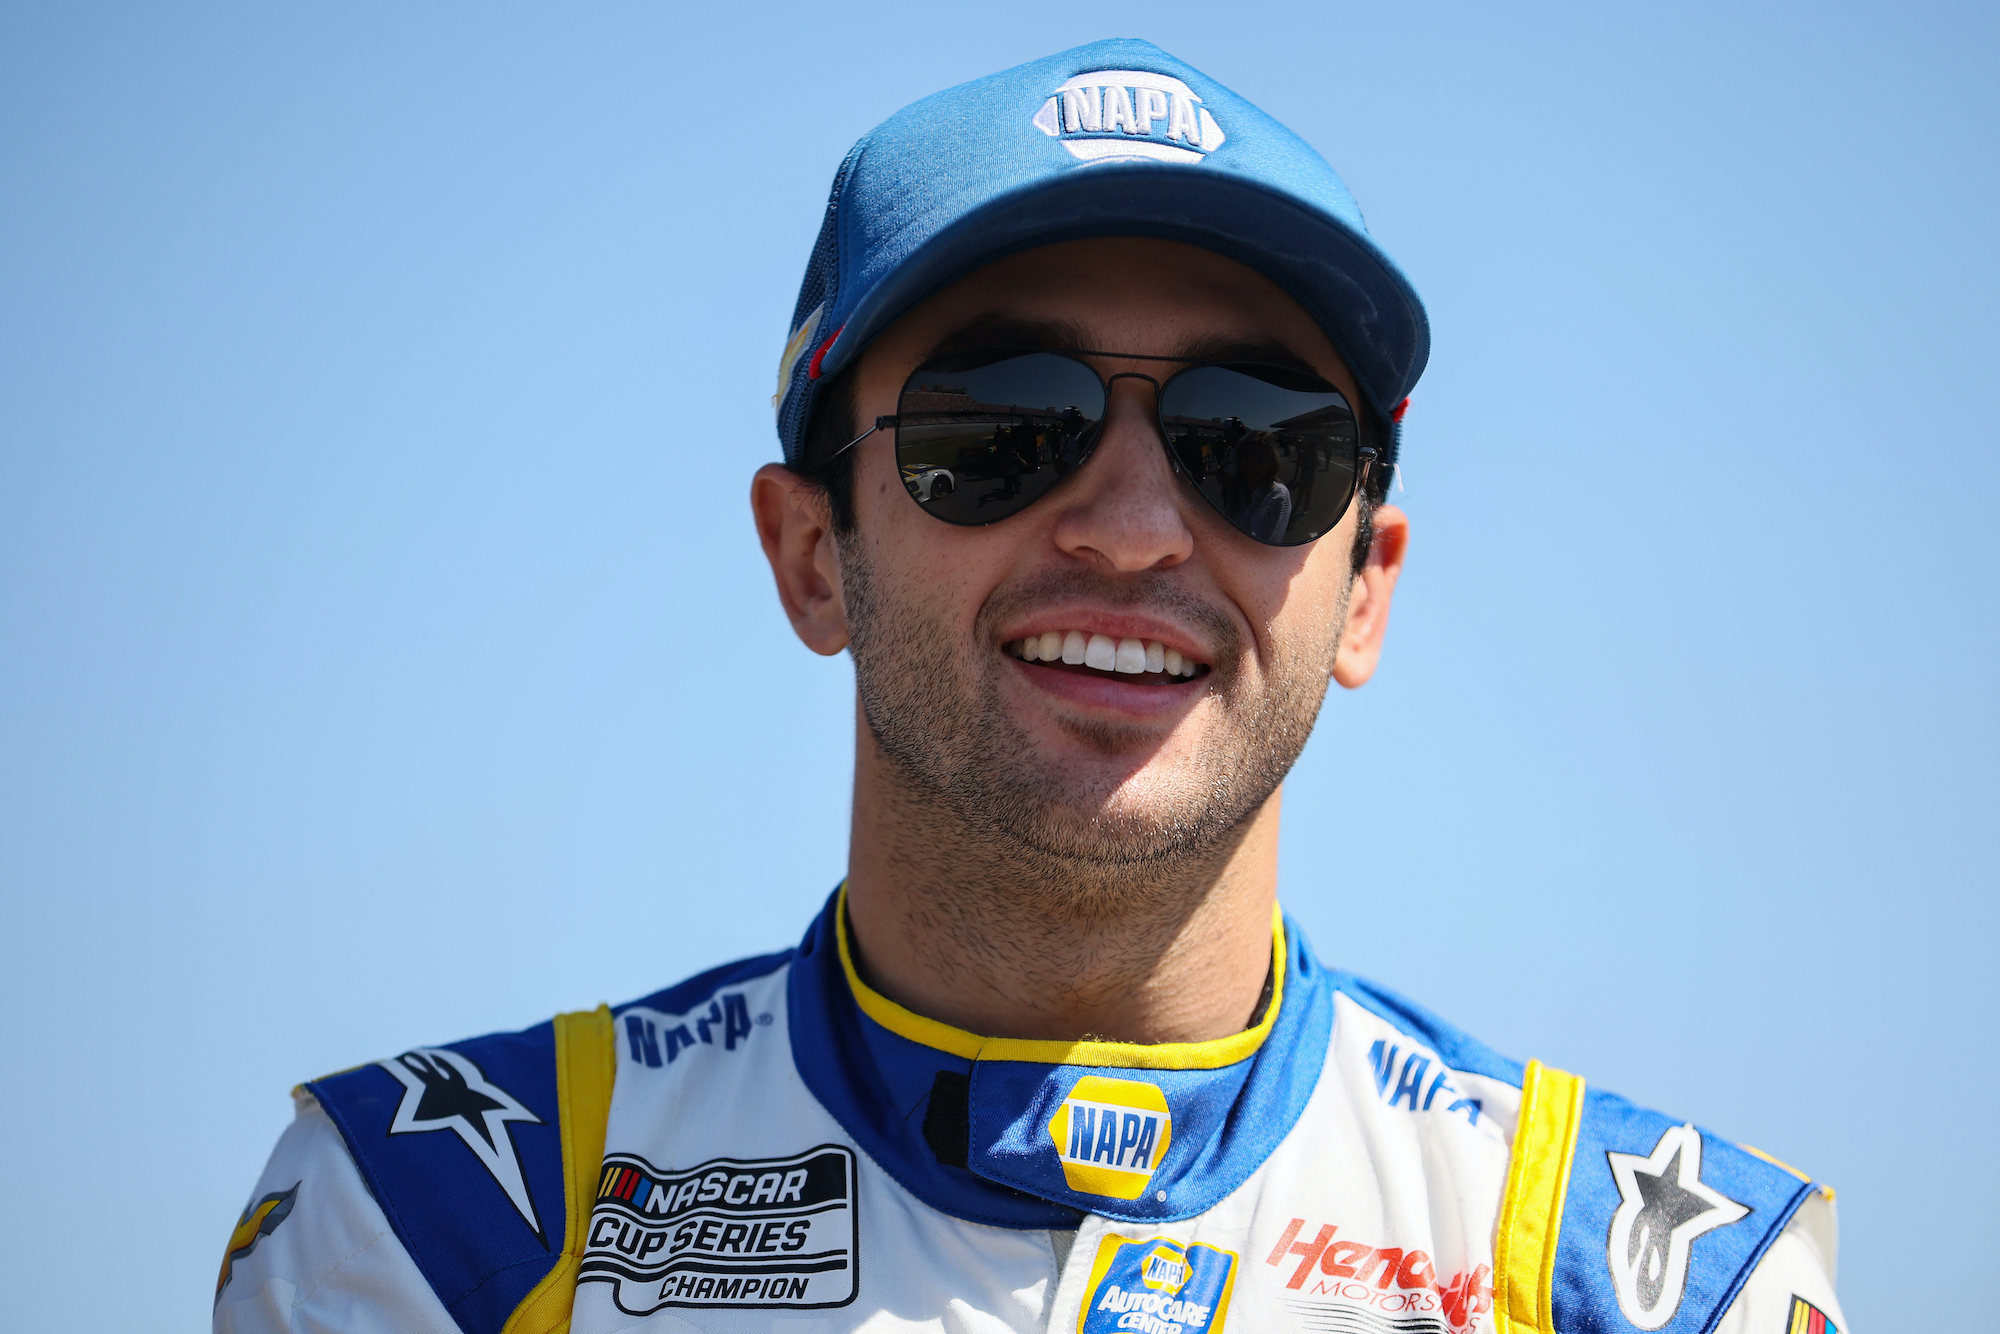 Chase Elliott Gets Dose of Bad News at Darlington That Could Affect His Chances at Top Finish on Sunday